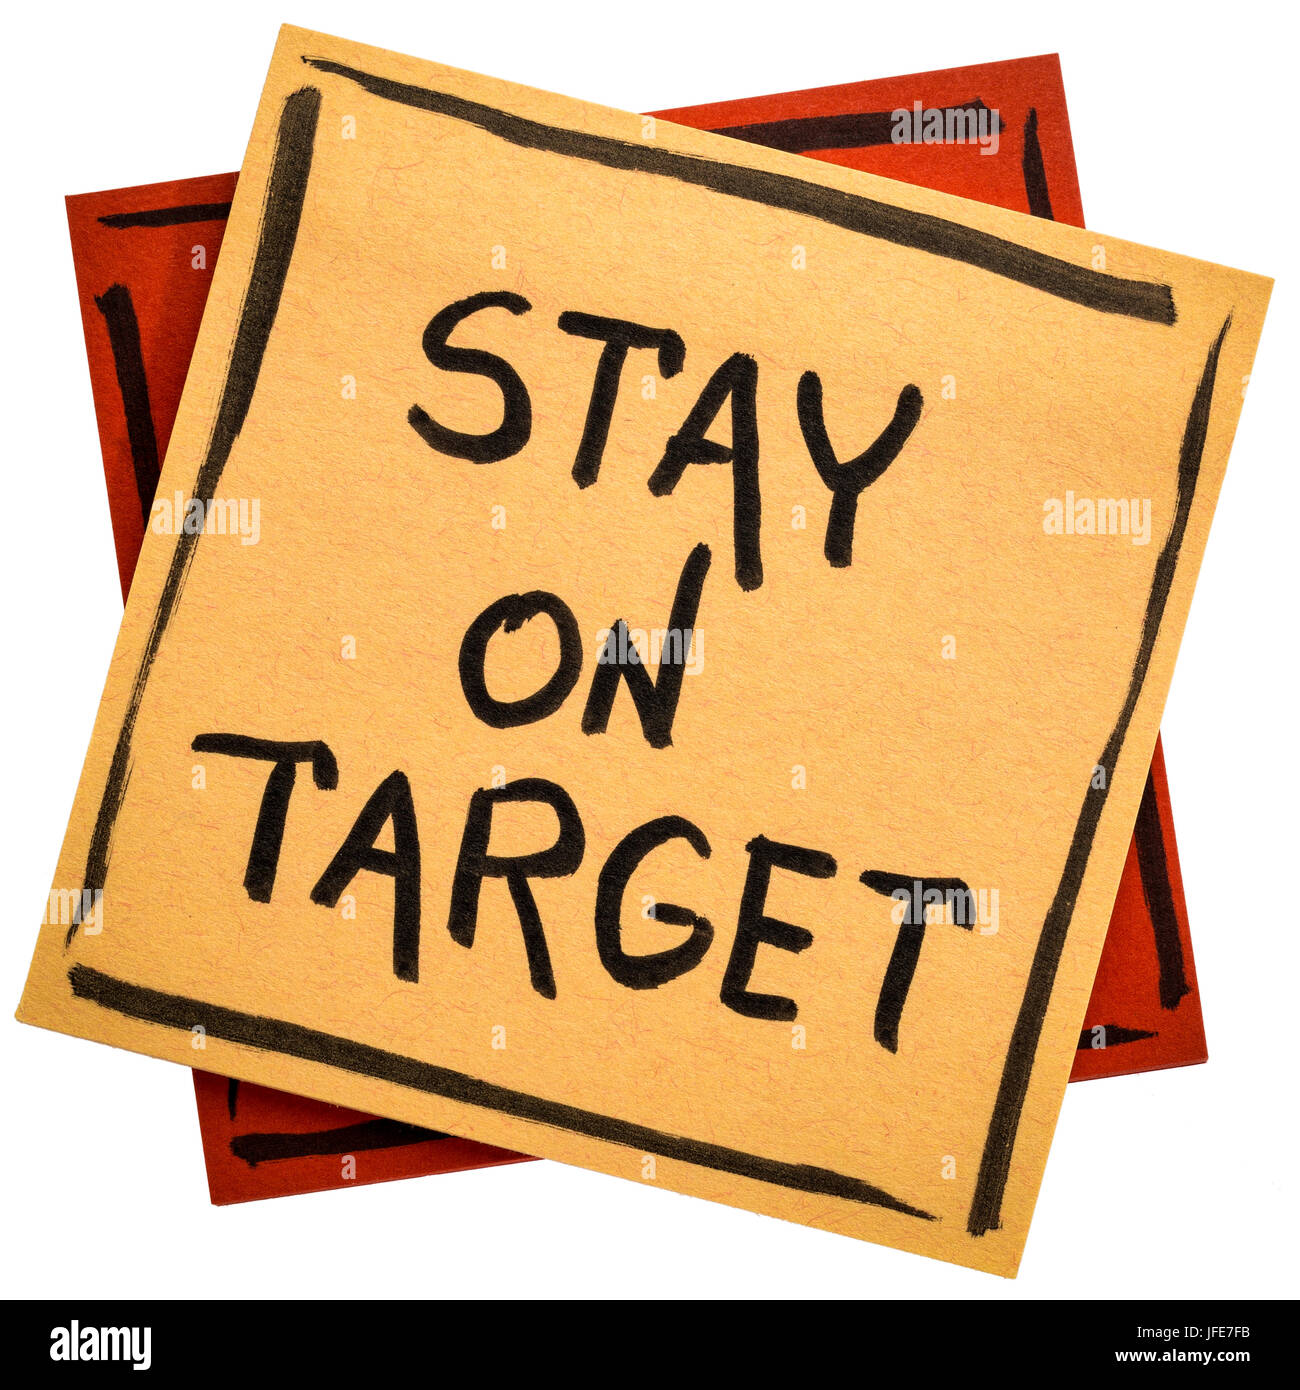 Stay on target - handwriting in black ink on an isolated sticky note Stock Photo